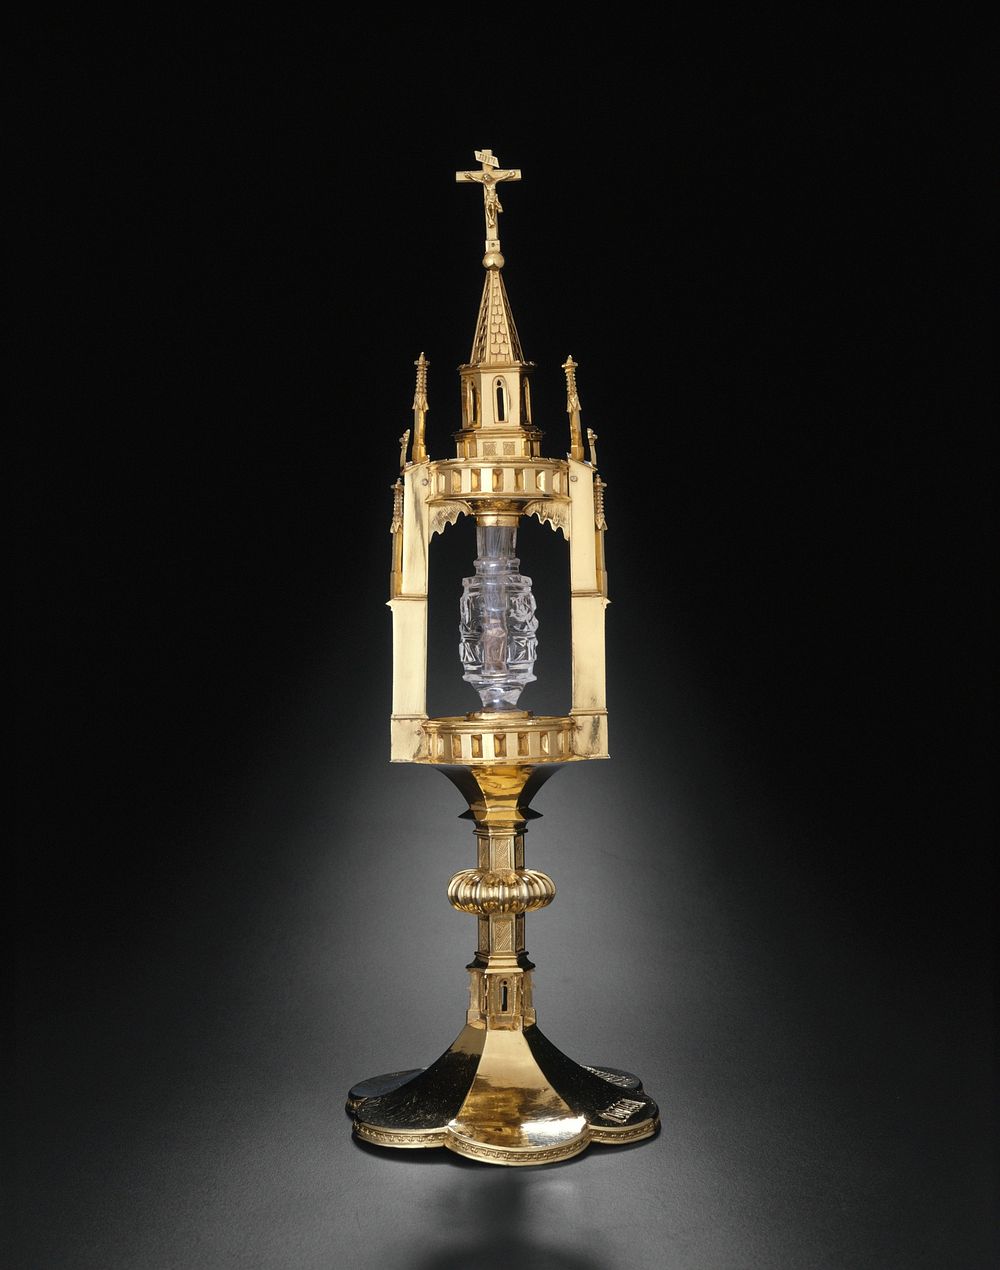 Reliquary Monstrance with a Tooth of Saint John the Baptist by Weddeghe Velstede